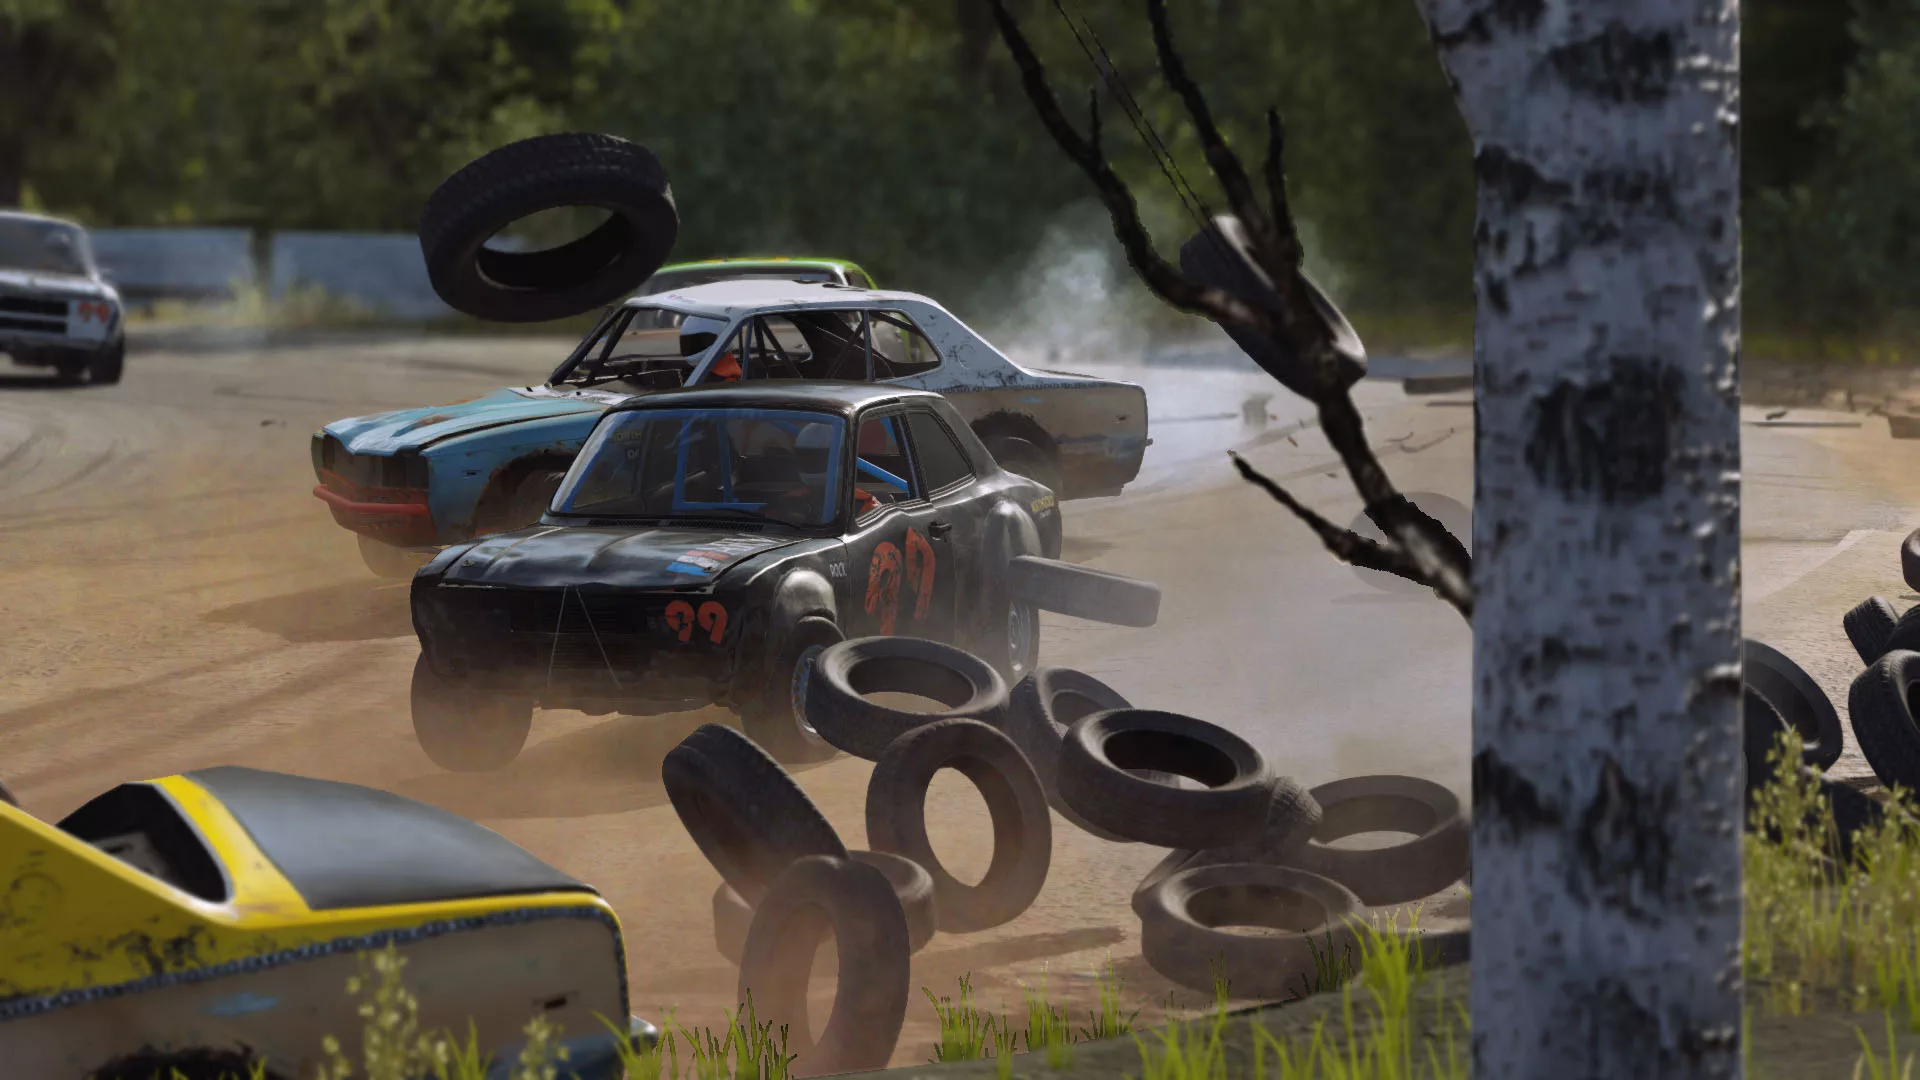 Two beat-up cars driving through a dirt arena.